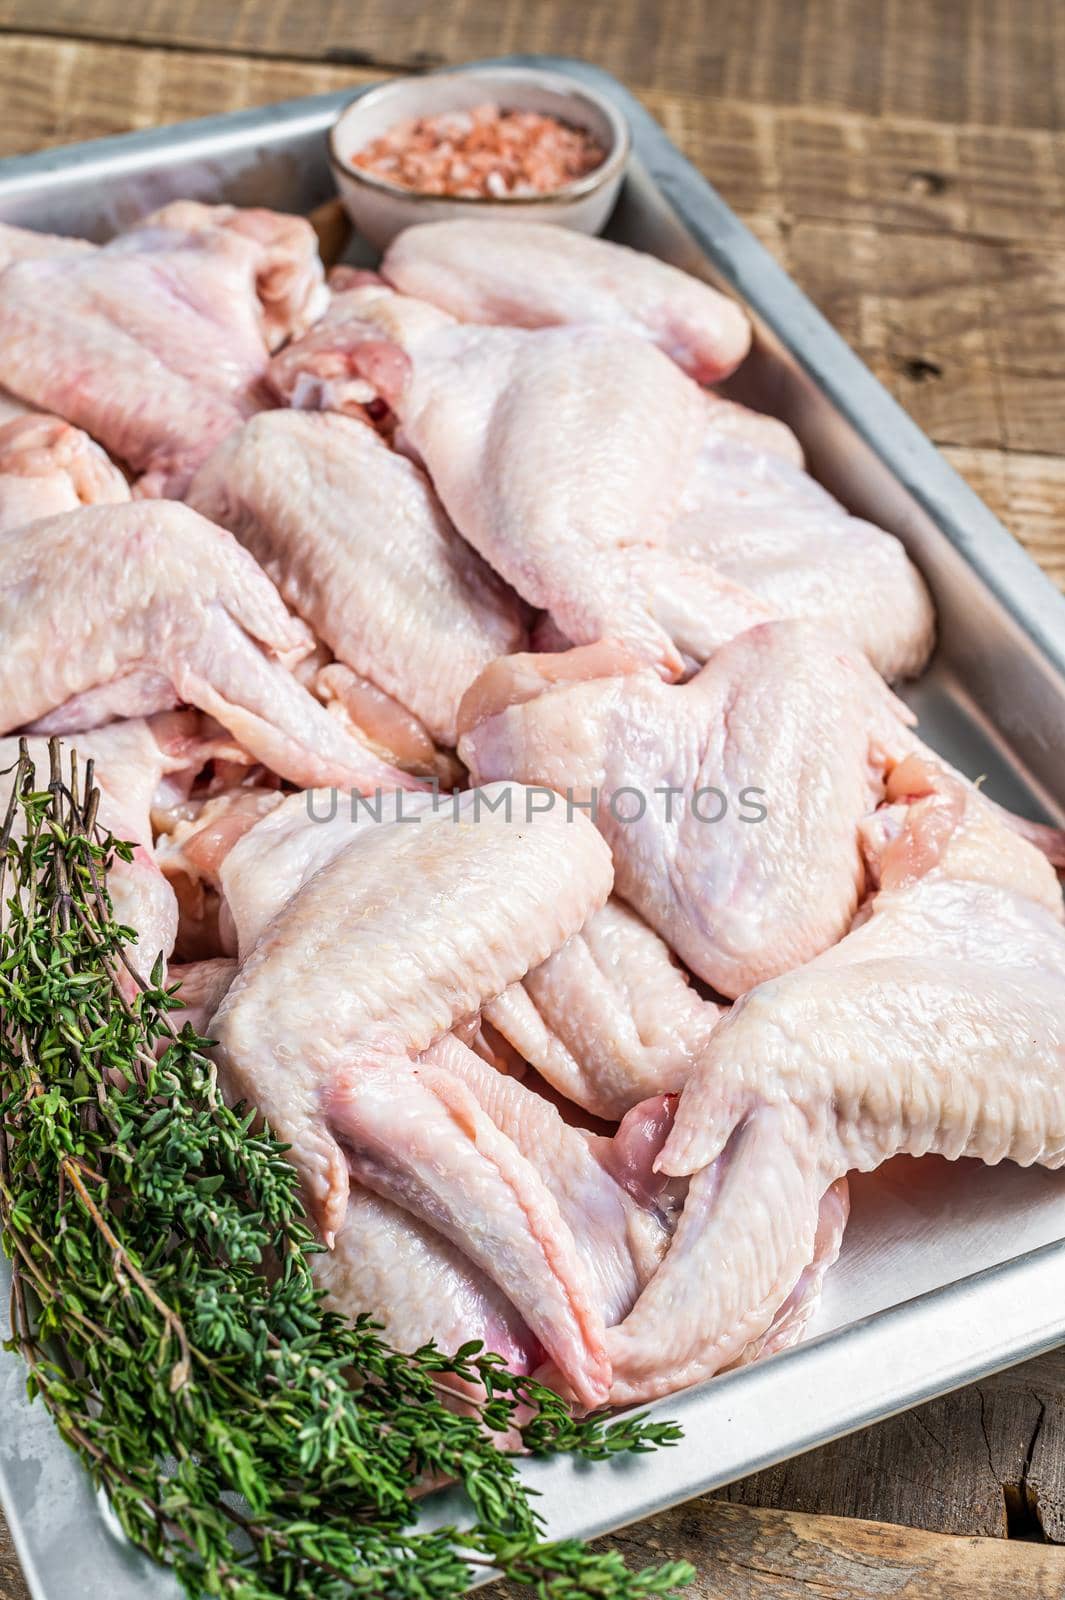 Raw chicken wings Poultry meat ready for cooking with herbs. Wooden background. Top view by Composter